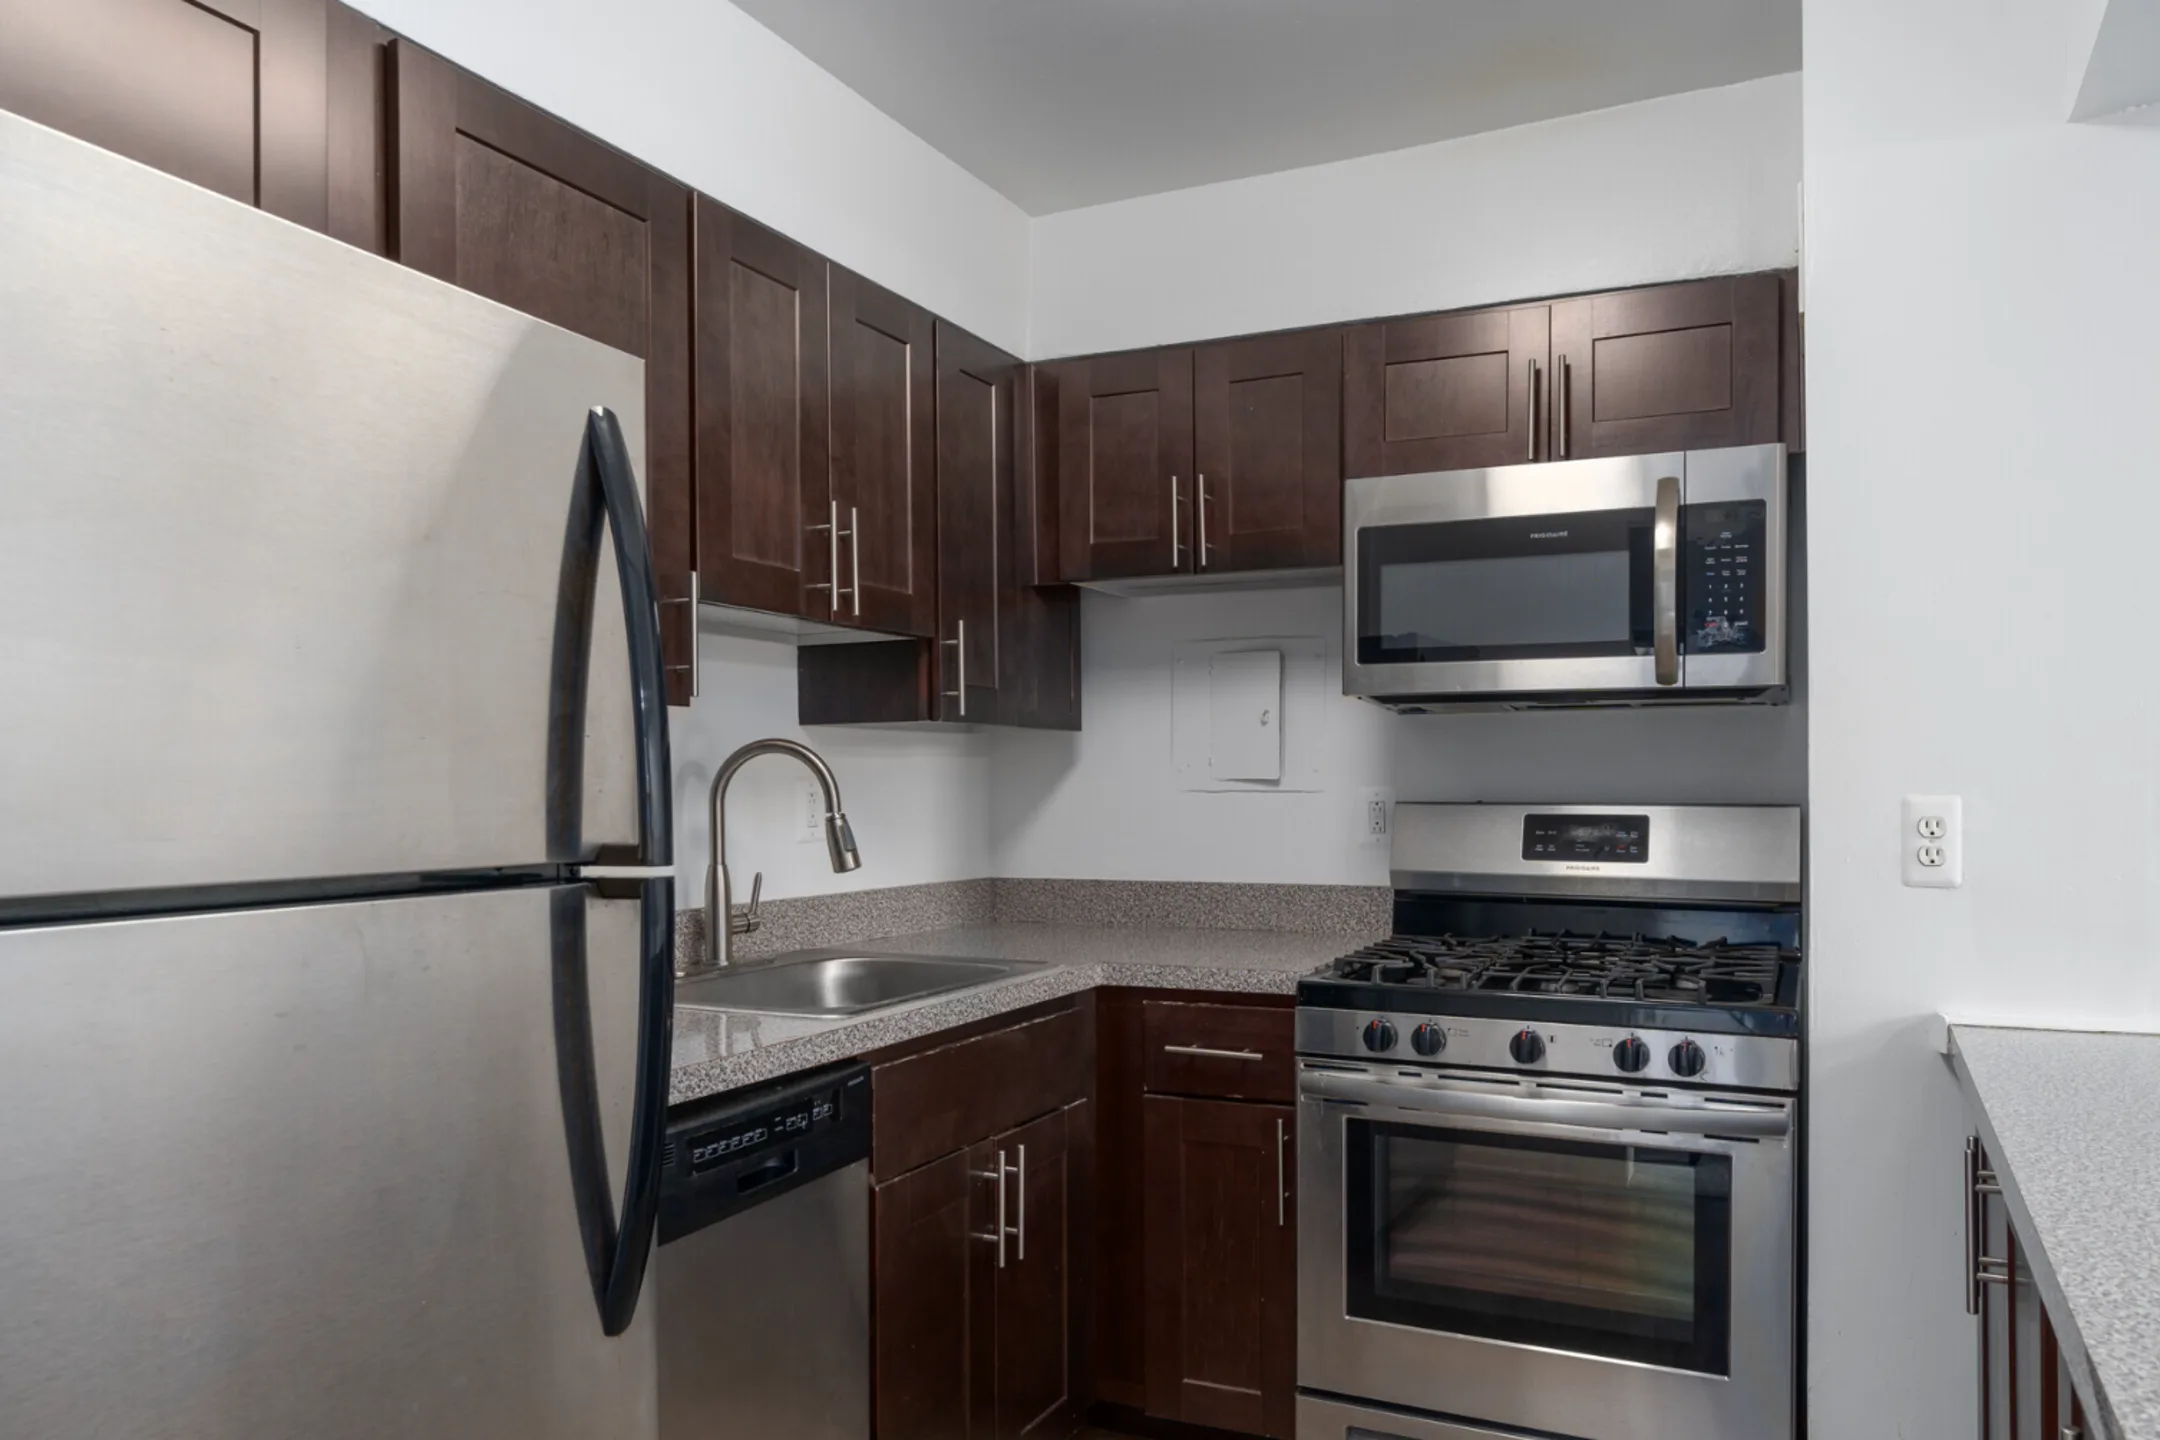 Kitchen - Courtside Square Apartments and Suites - King of Prussia, PA